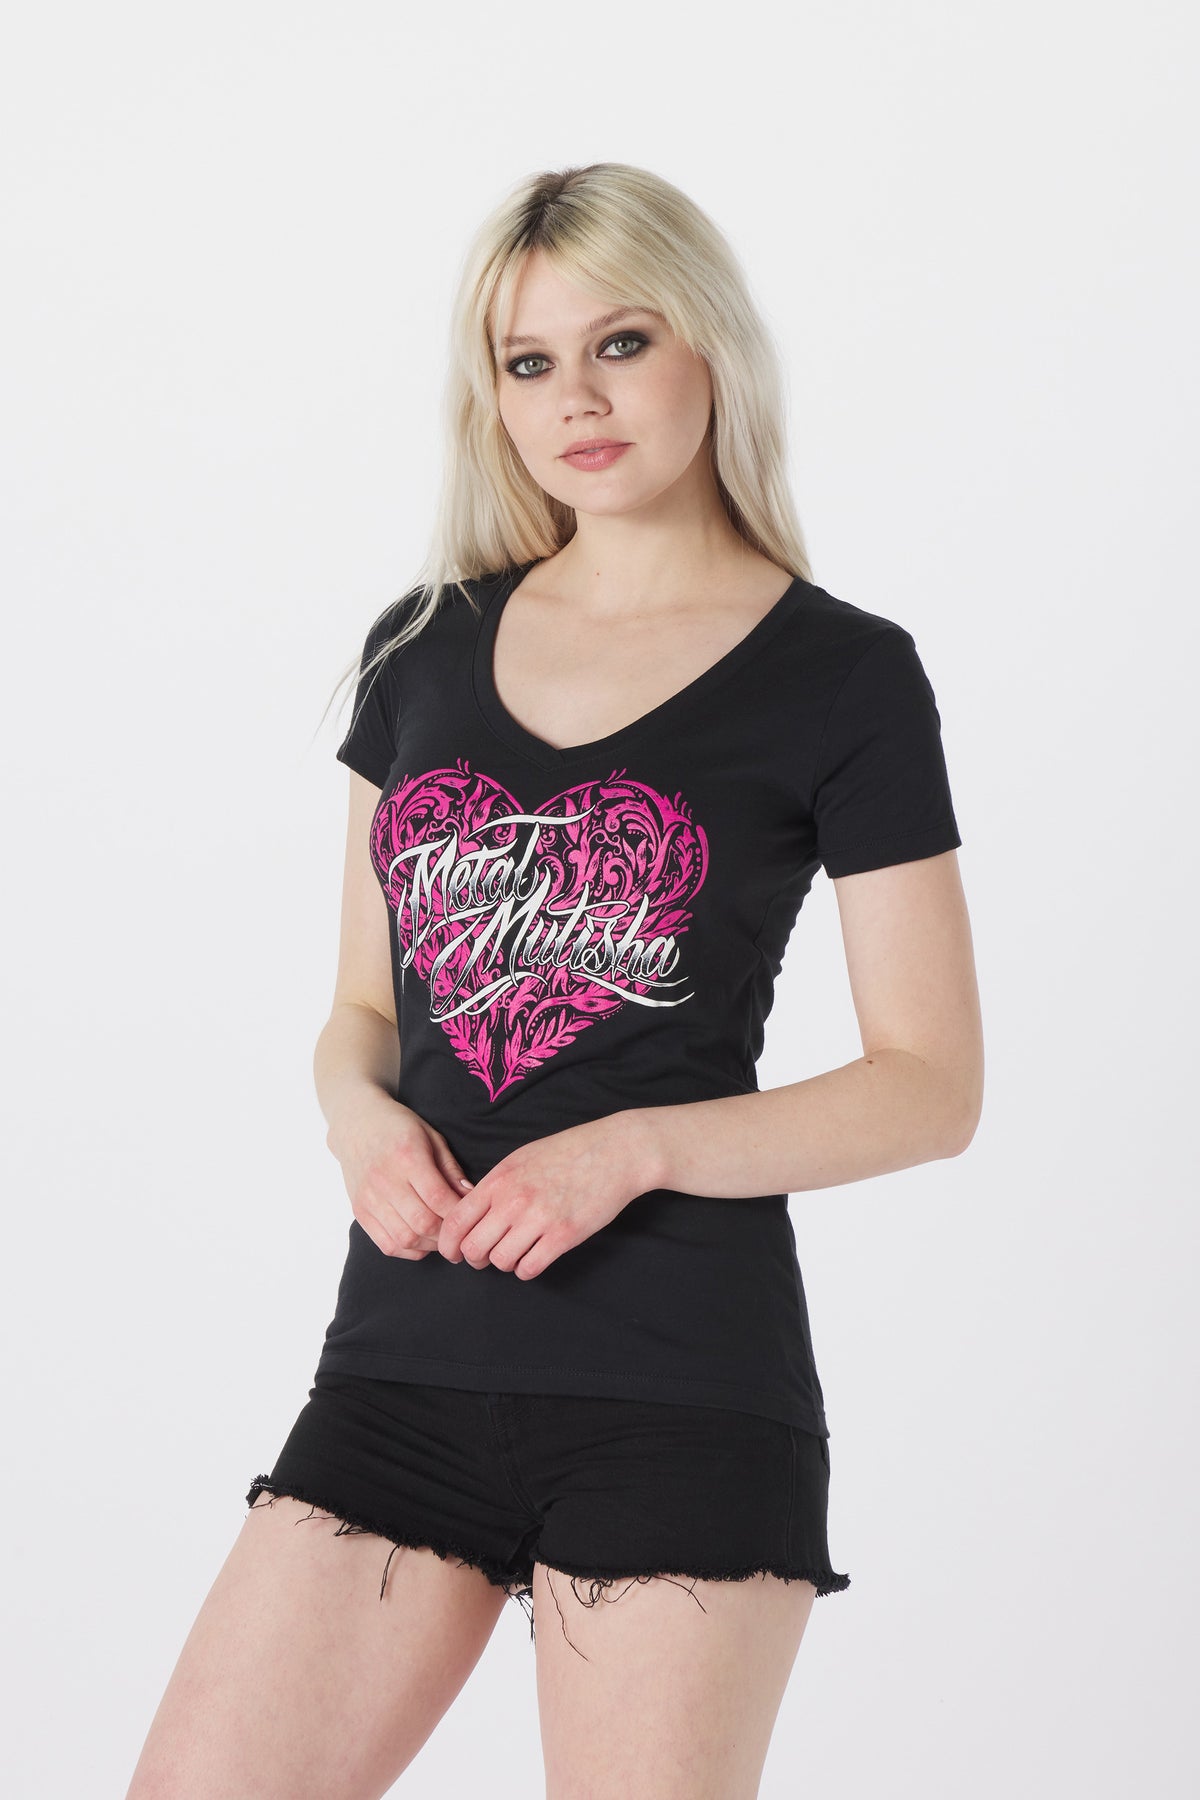 HEARTCORE V-NECK SLIM FIT TEE